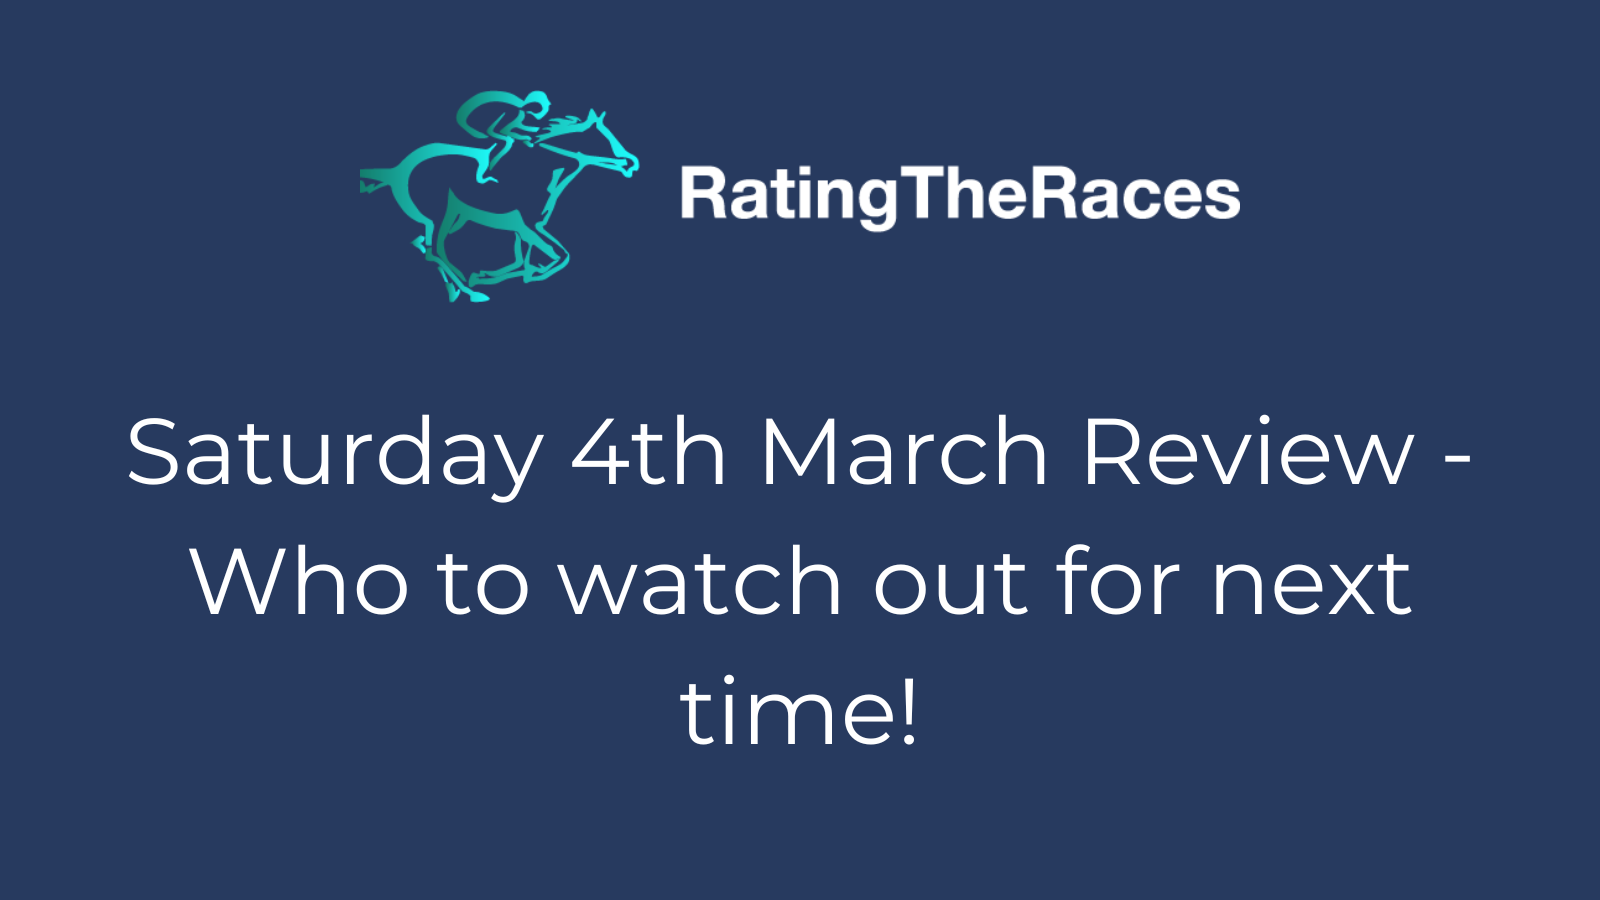 Saturday 4th March Review